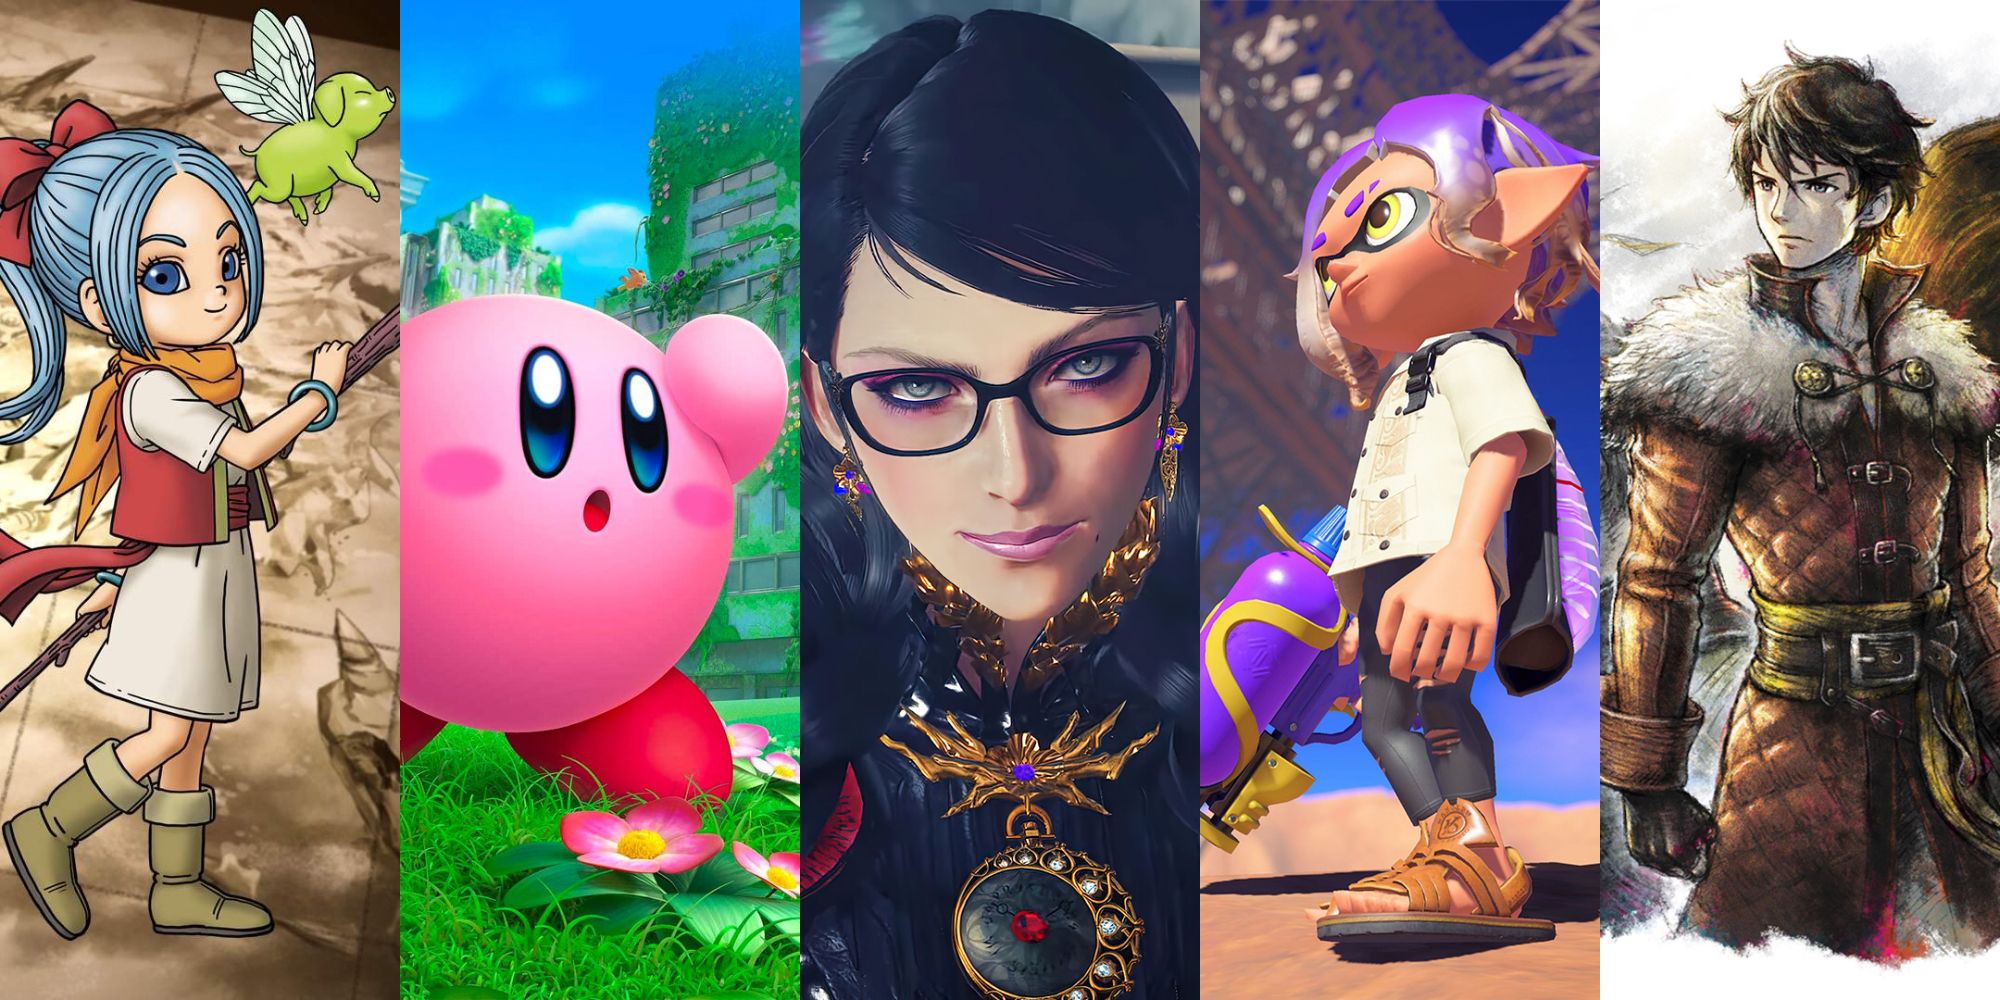 A vertically sliced image showing five characters from Nintendo Switch games released in 2022; from left to right - Mia from Dragon Quest Treasures, Kirby from Kirby and the Forgotten Land, Bayonetta 3's Bayonetta, an Inkling from Splatoon 3, and Triangle Strategy's Serenoa Wolffort.